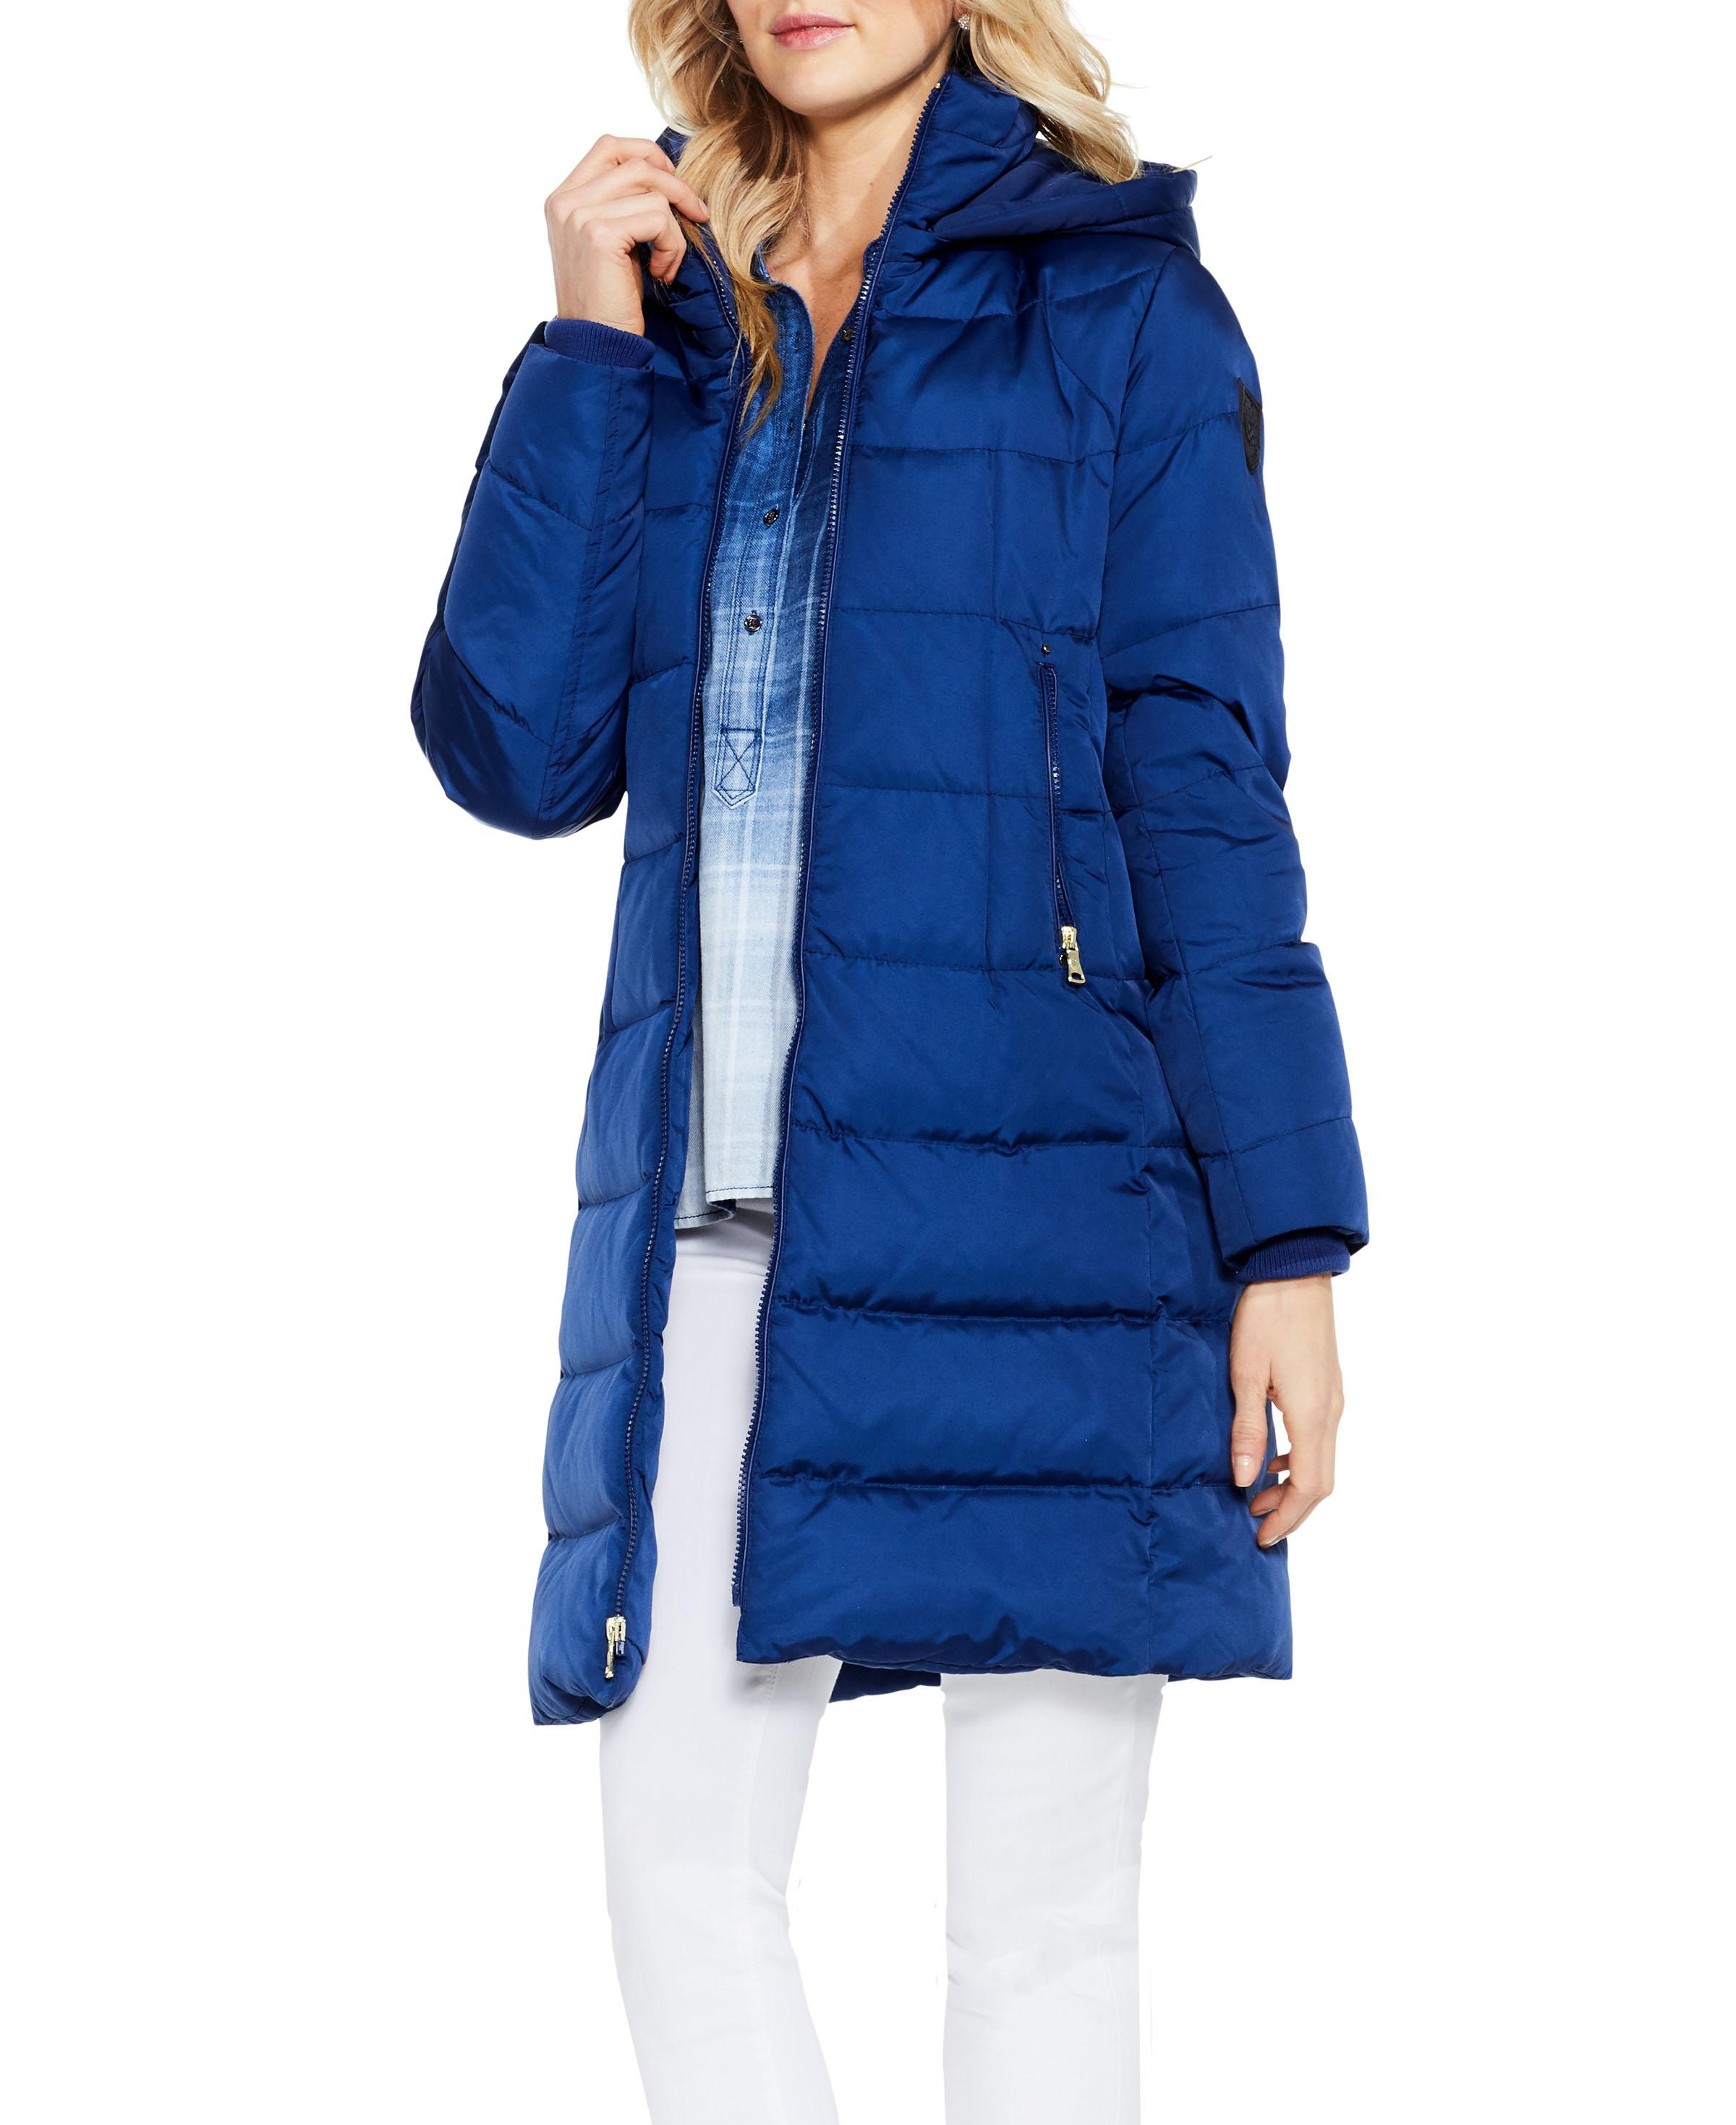 Lyst - Vince Camuto Hooded Channel-quilted Coat in Blue